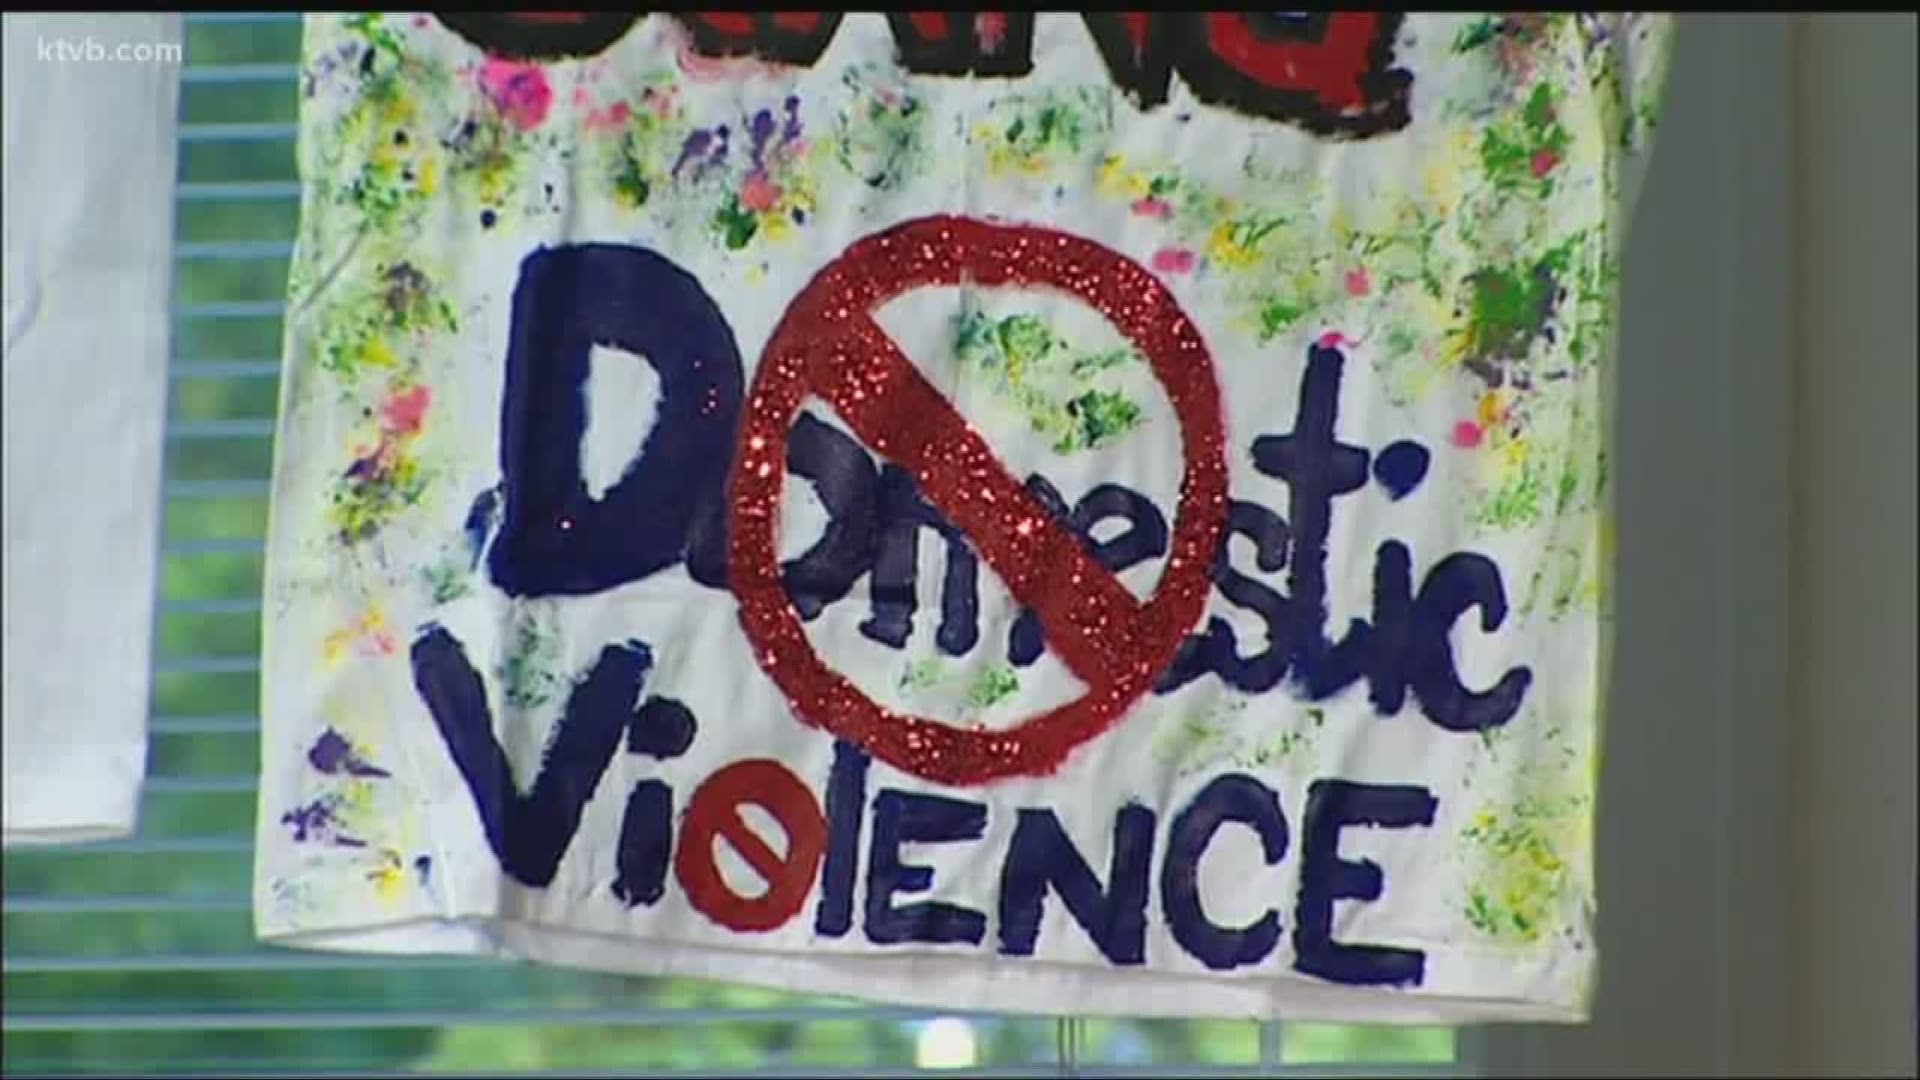 After a violent attack at a Nampa home last week, victims advocates are speaking out in an effort to help others struggling with domestic abuse.